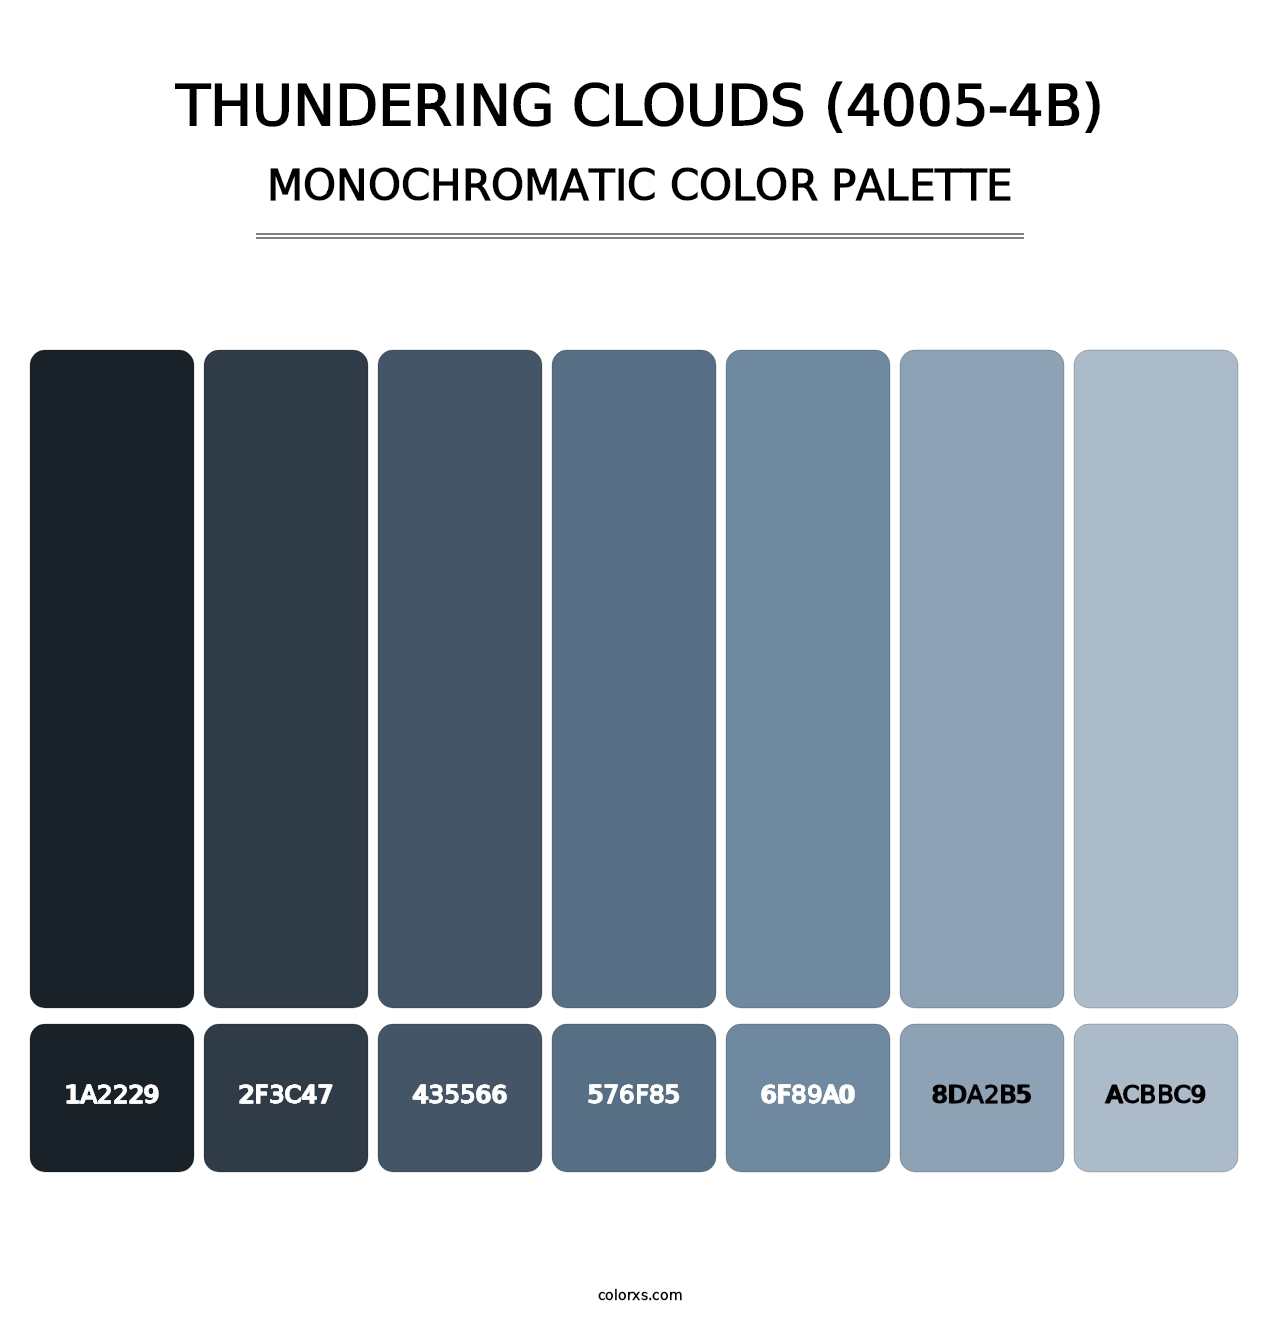 Thundering Clouds (4005-4B) - Monochromatic Color Palette